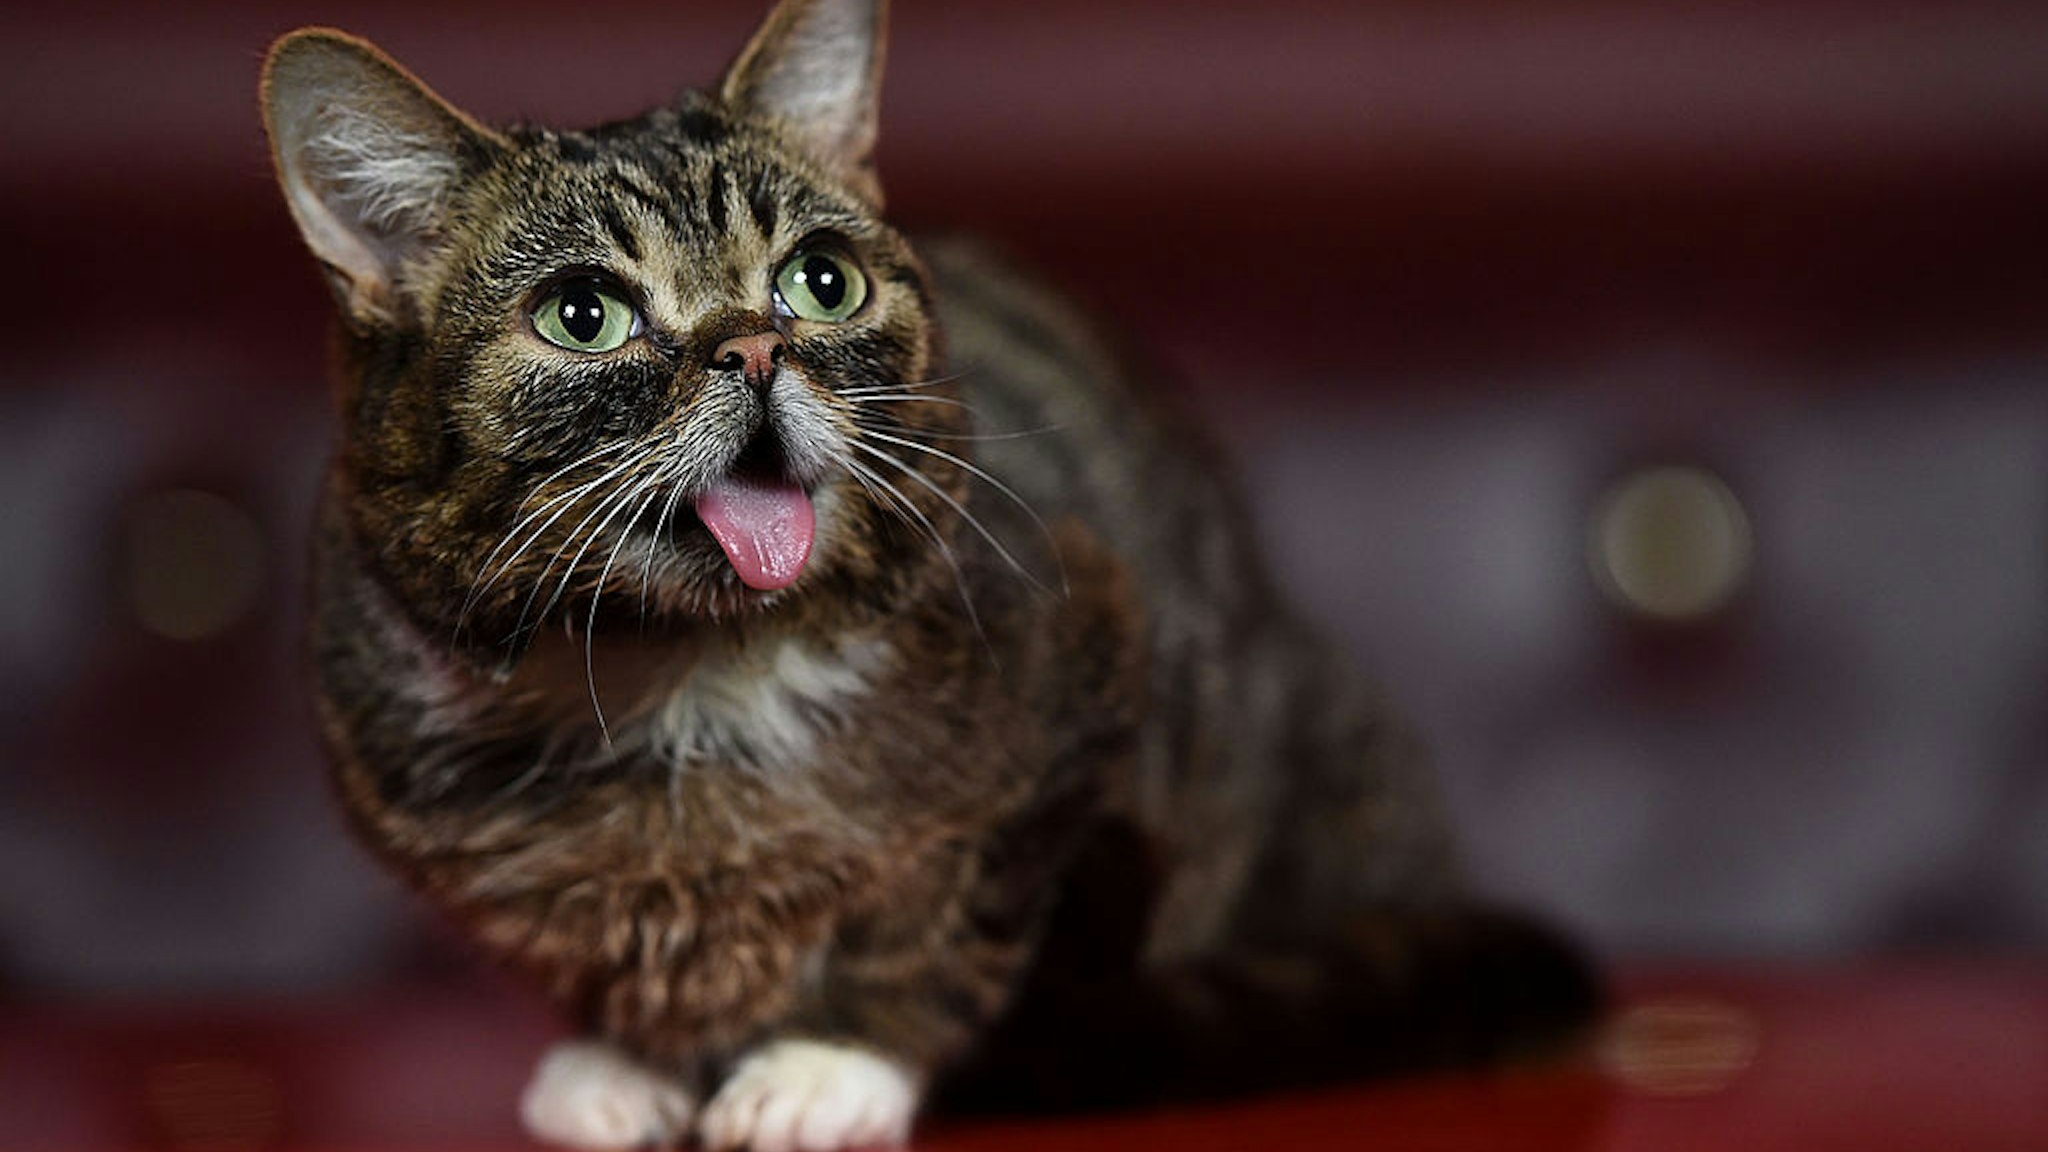 Celebrity cat Lil BUB attends the Lil BUB meet and greet at The Belasco Theater on August 8, 2014 in Los Angeles, California.